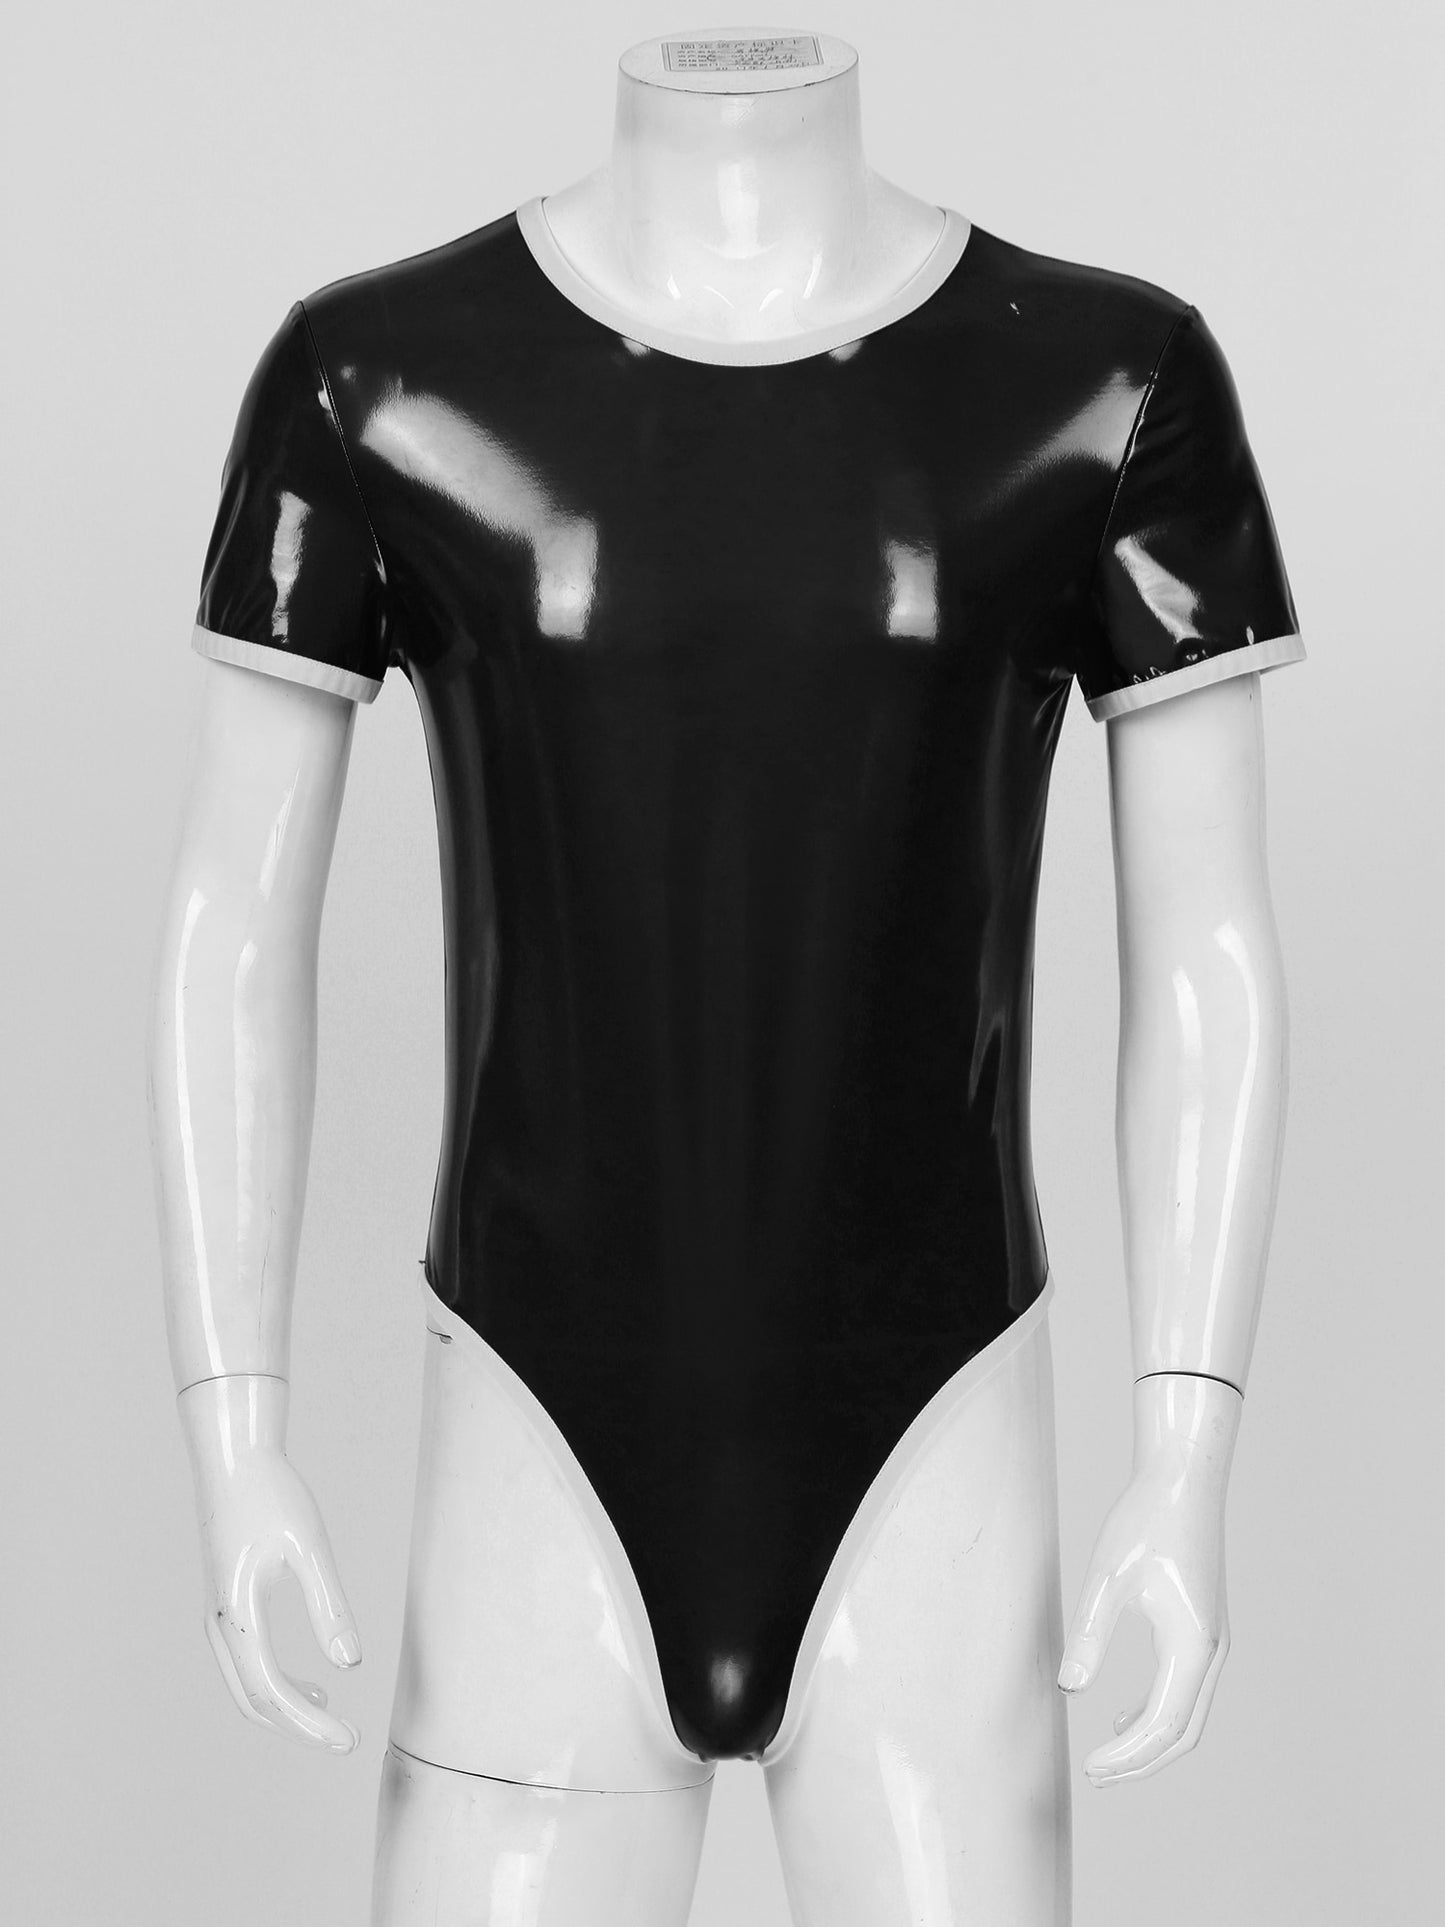 Patent Leather Bodysuit: Sexy Male Sissy Leotard for Parties